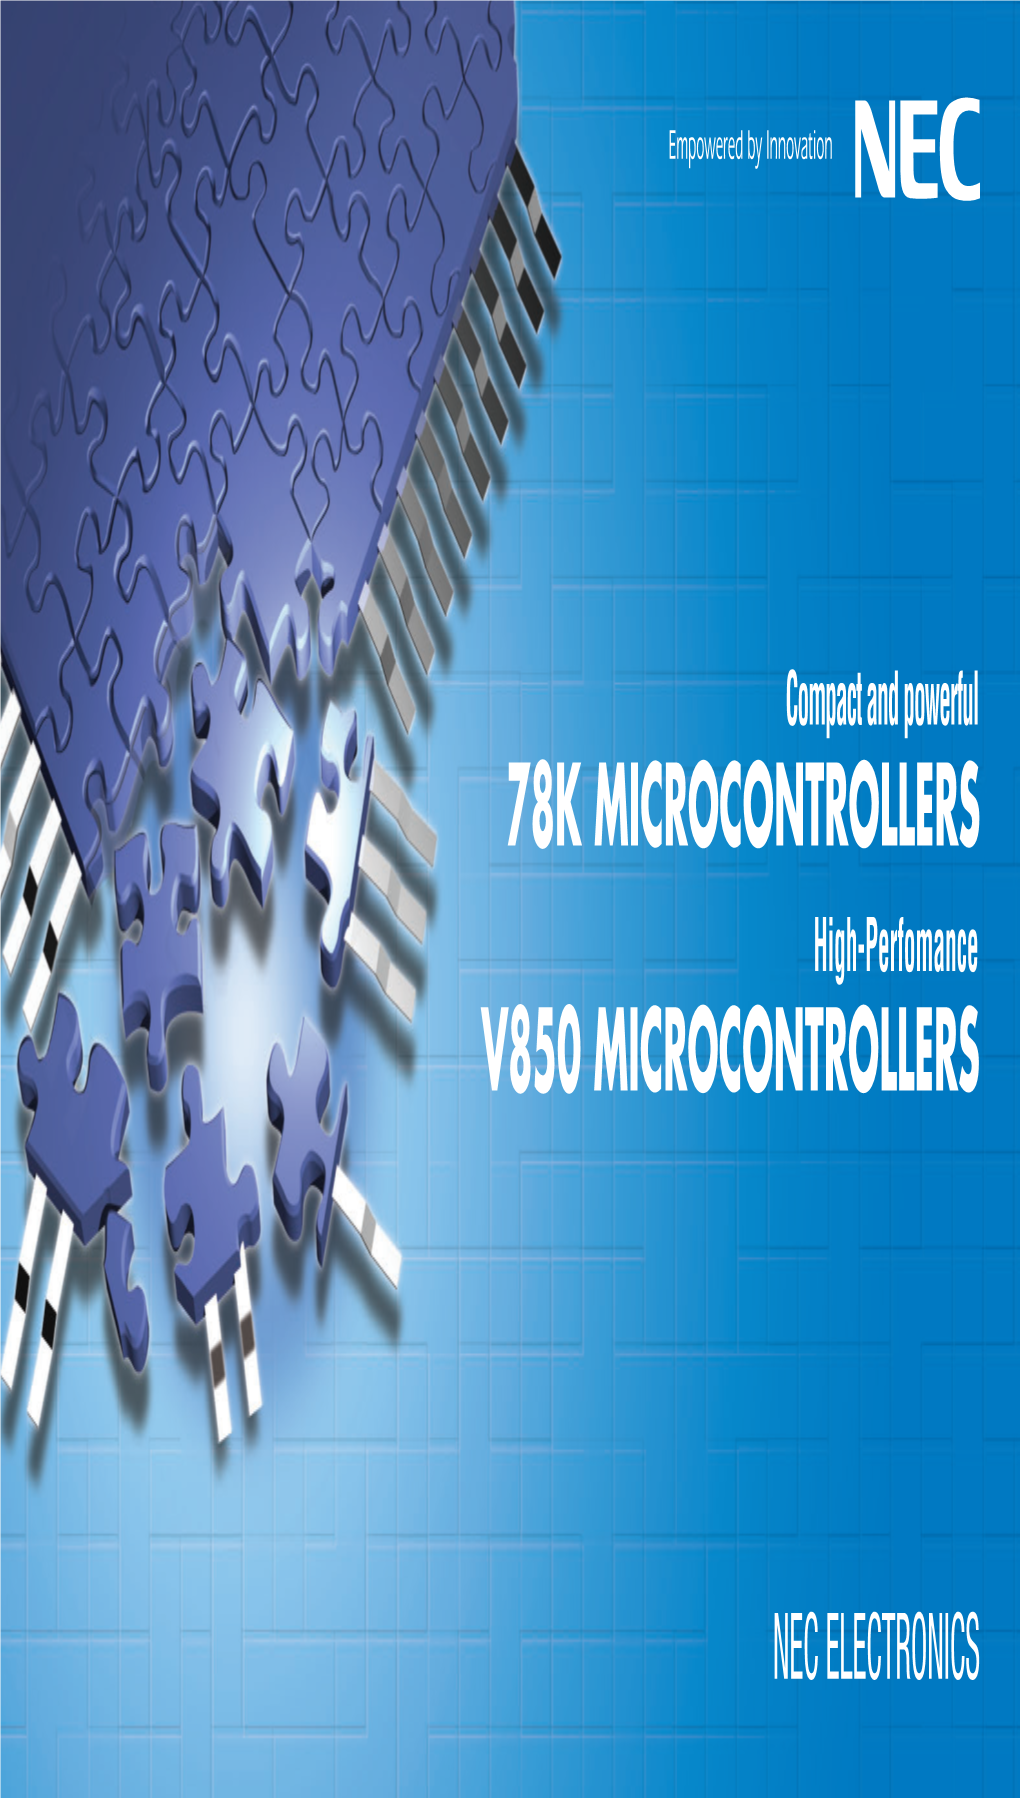 78K Microcontrollers, V850 Microcontrollers